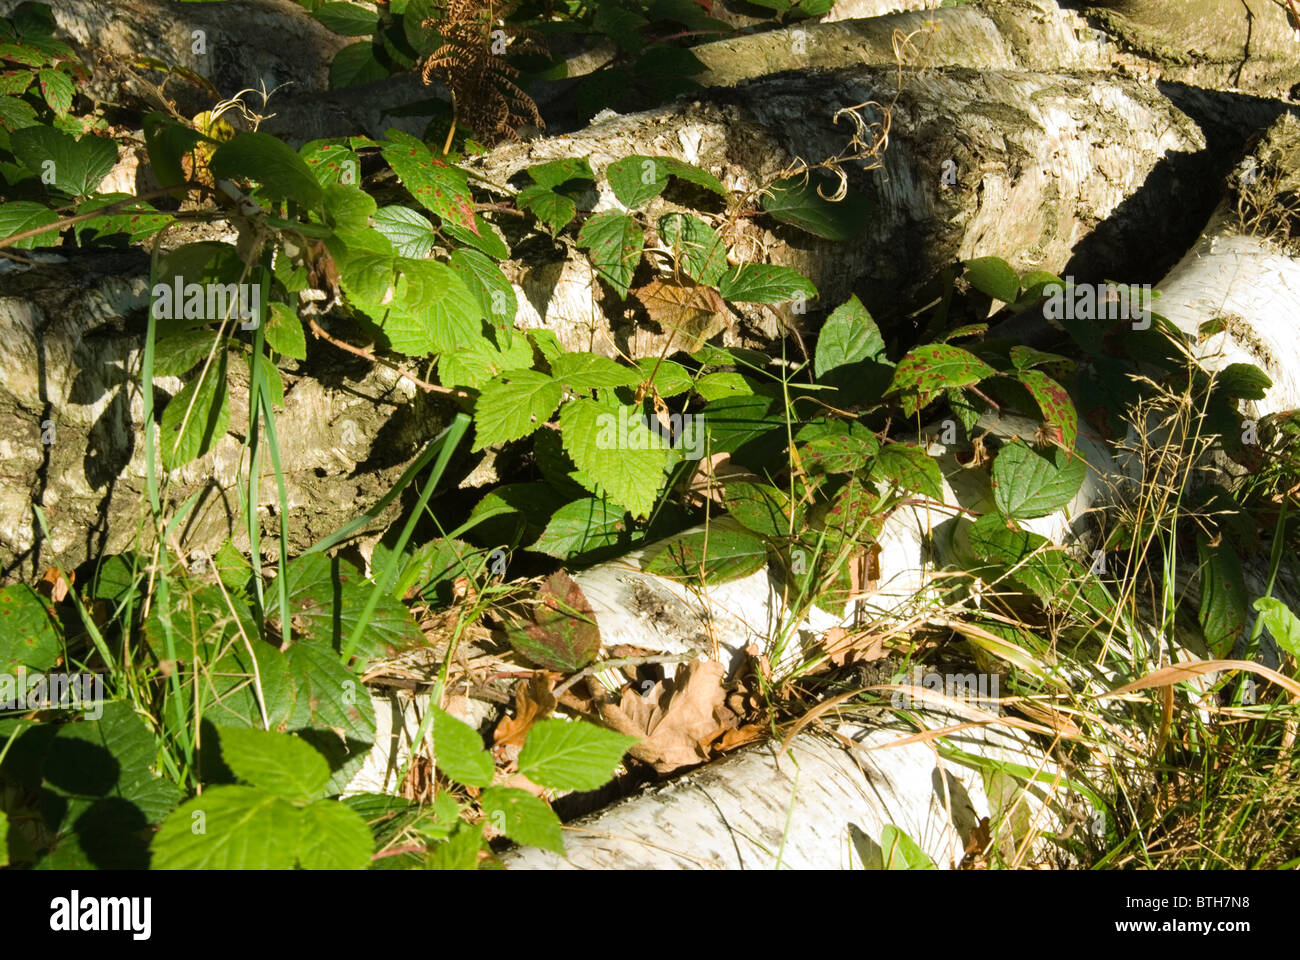 Felled Birch logs overgrown with brambles in Sherwood Forest, Nottinghamshire: Stock Photo